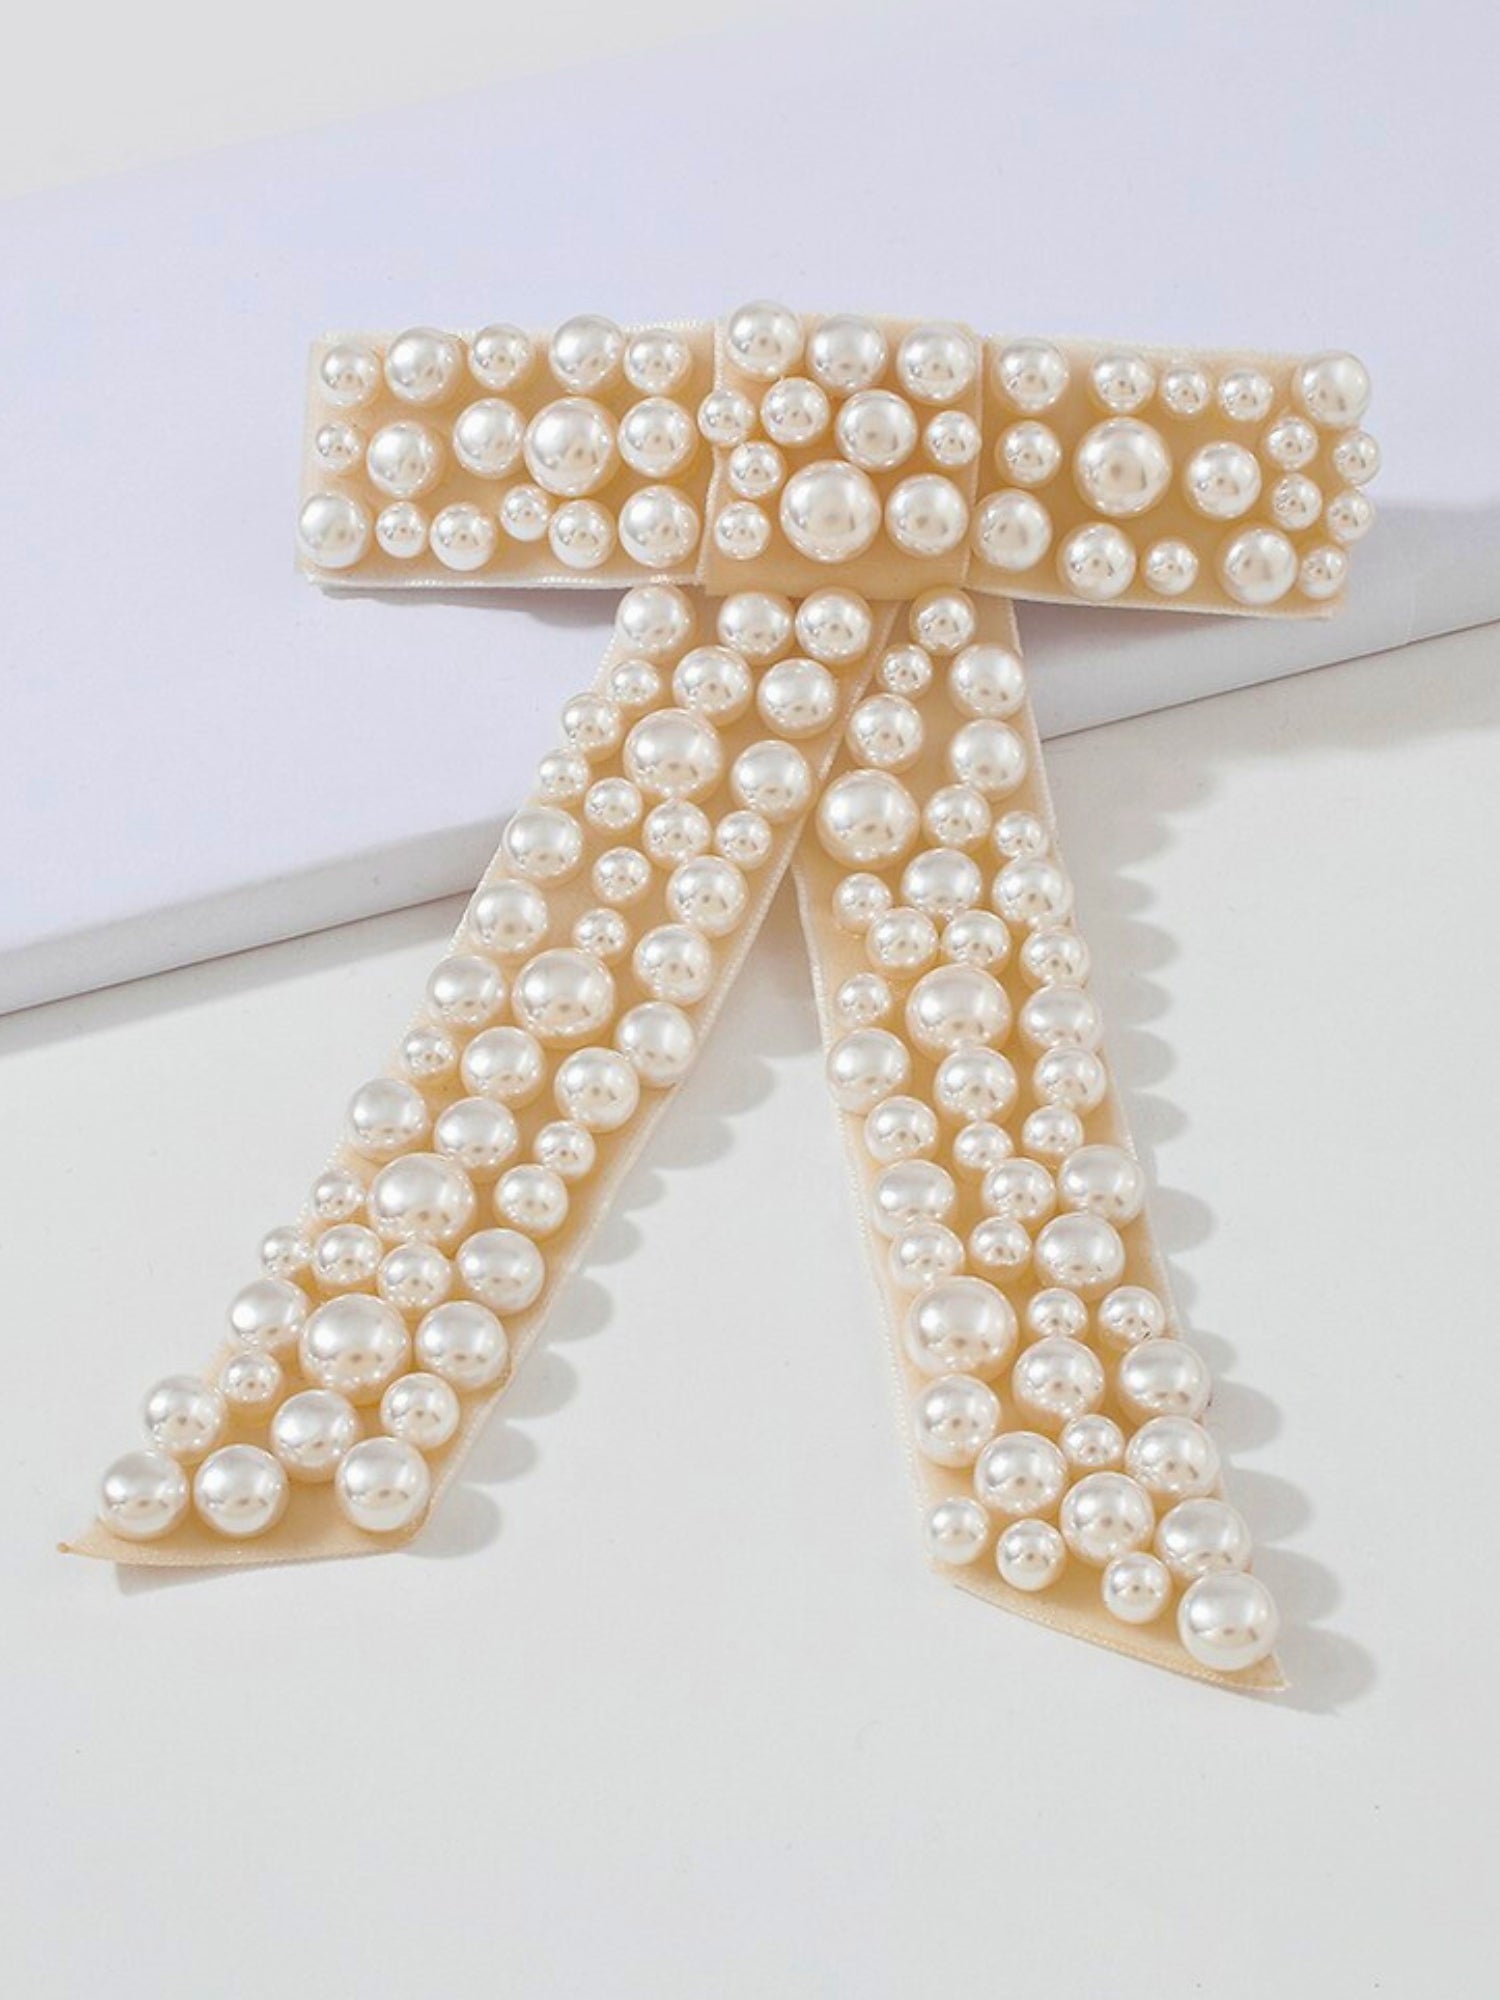 The Pearl Bow Barrette - Who doesn't love a hair bow!? The Pearl Bow Barrette is the cutest accessory to add to your wardrobe, adorned is pearl embellishments and made of an ivory velvet fabric. This barrette features a high quality clip that can hold the